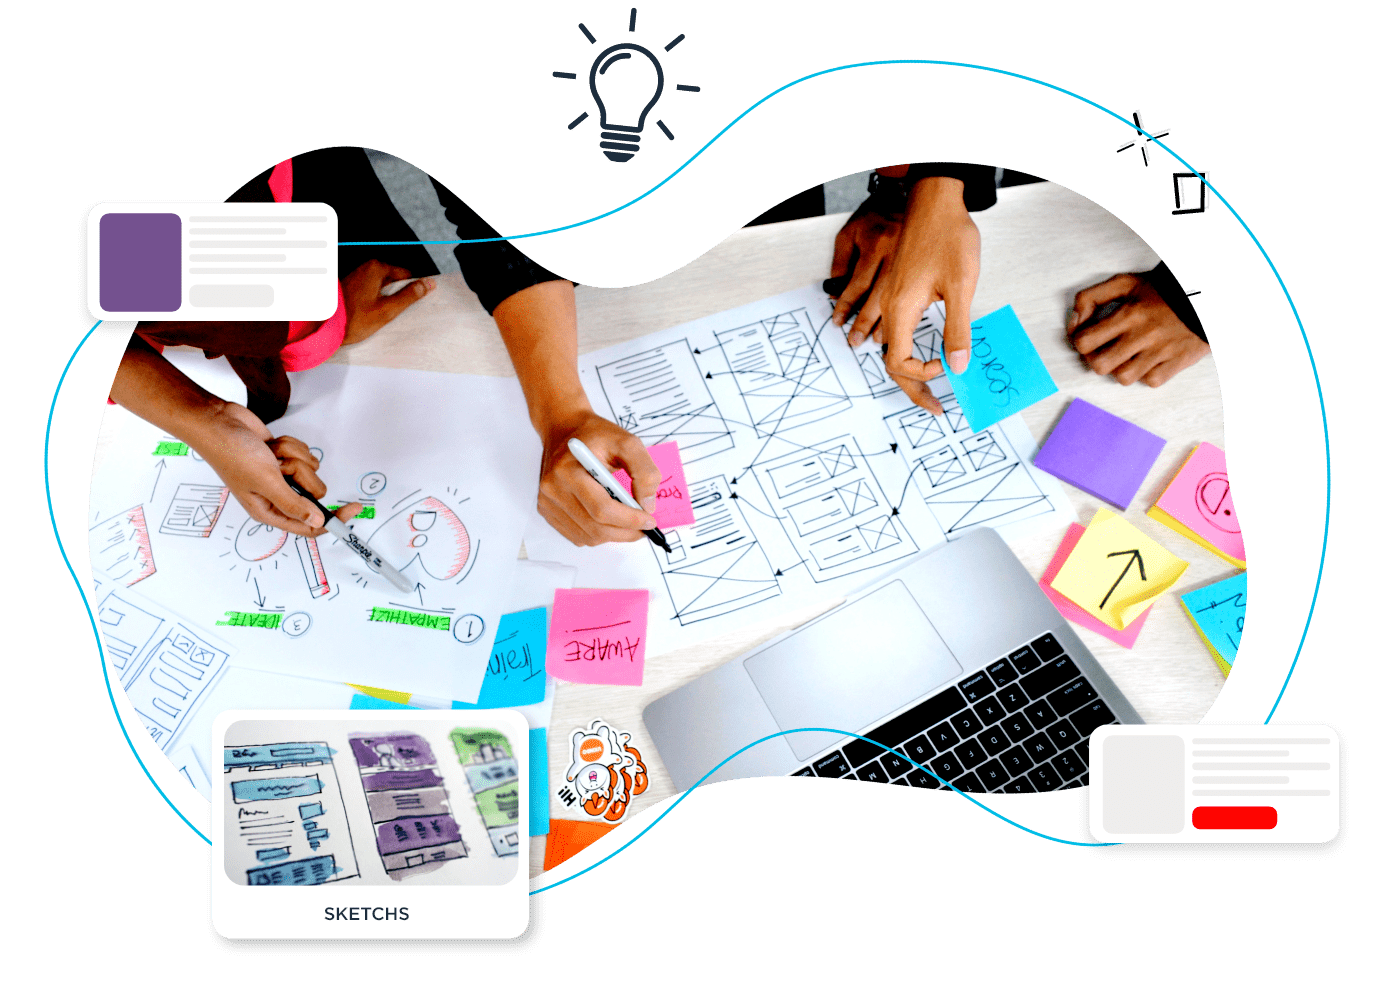 image of a table with various paper sketches and wireframes that a group of people are working on